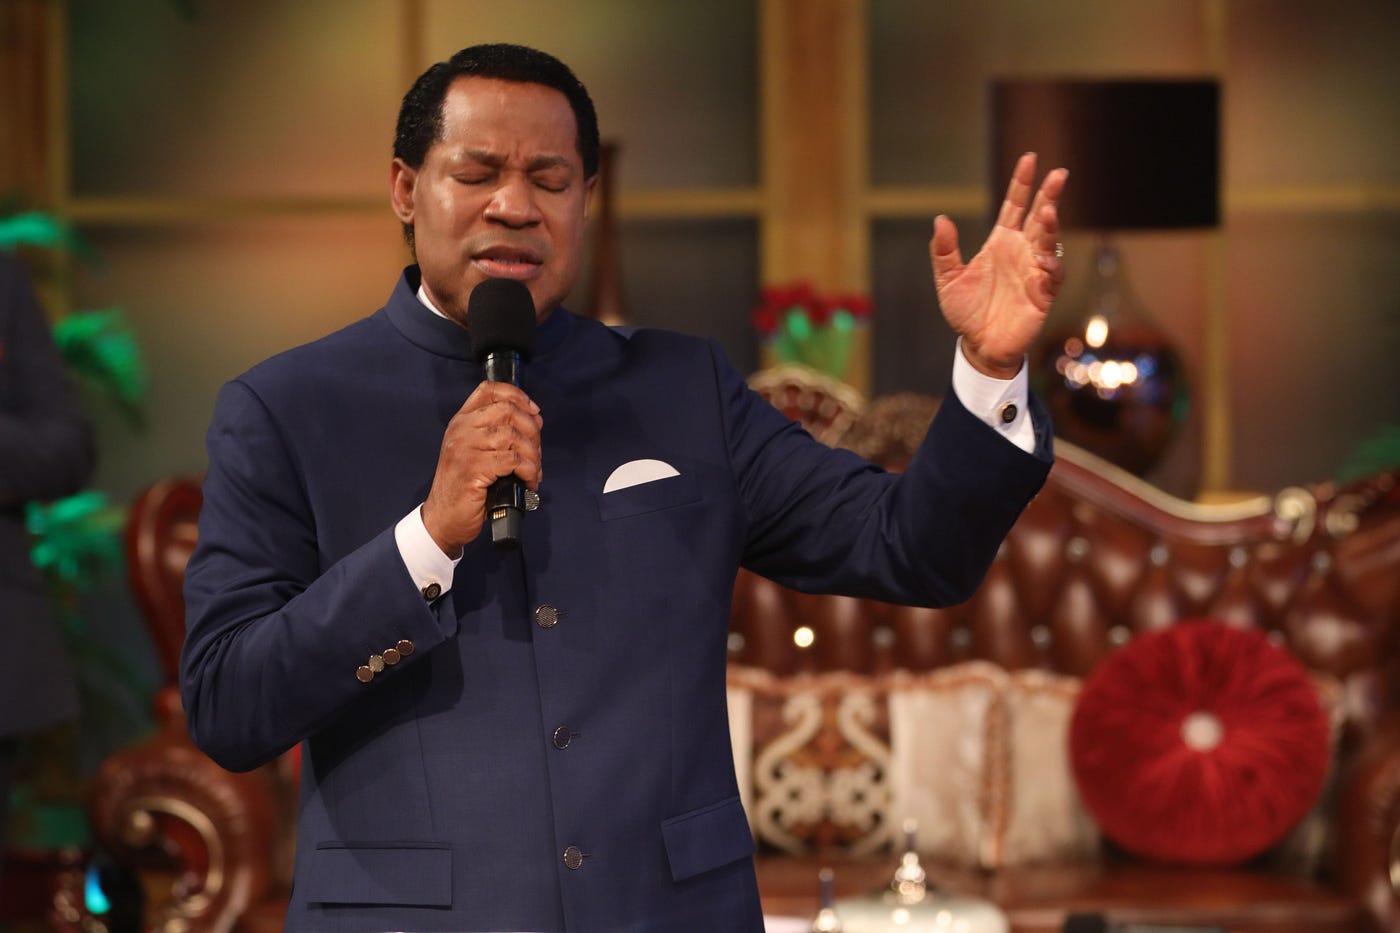 Pastor Chris' Blog: A Kingdom Not of This World